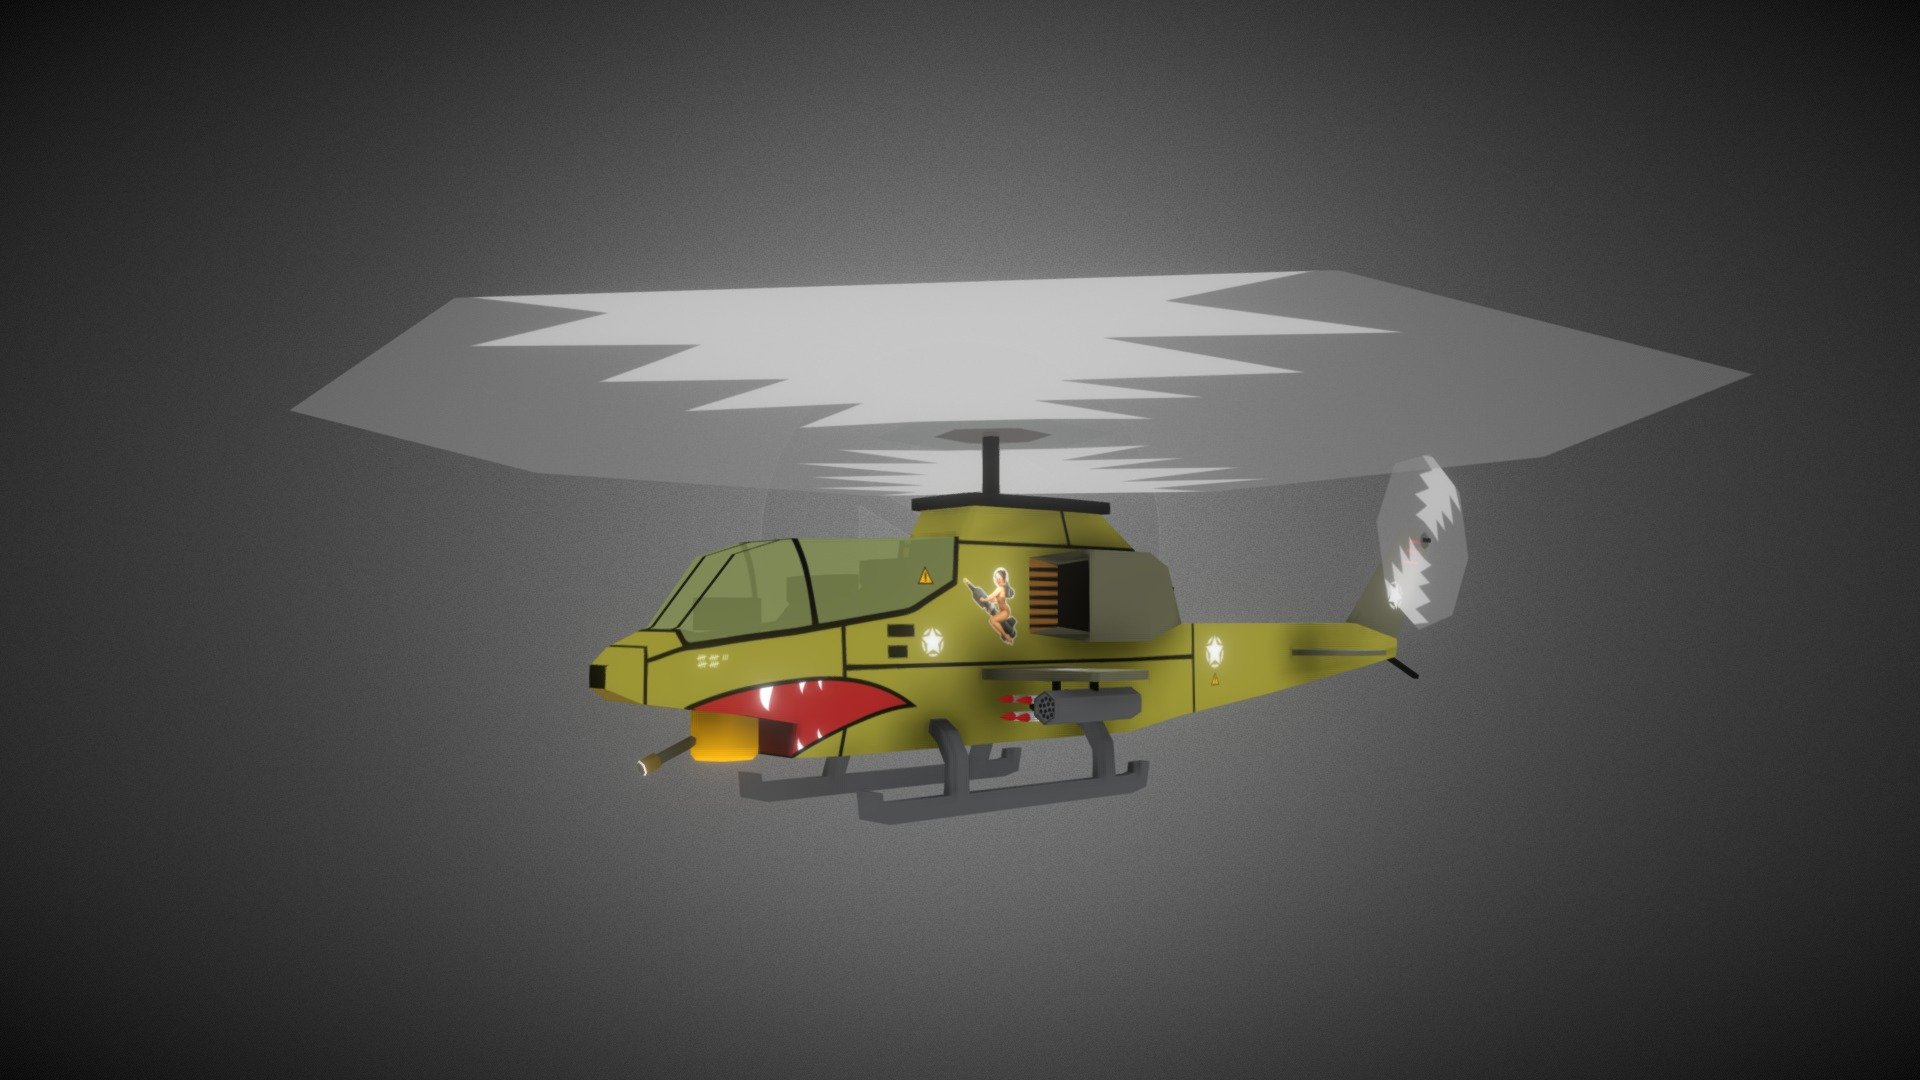 Low Poly Helicopter - Retro Style
Game assets
Blender + Illustrator - Low Poly Hellicopter - 3D model by Hamid Amini (@h.amini.tmu) 3d model